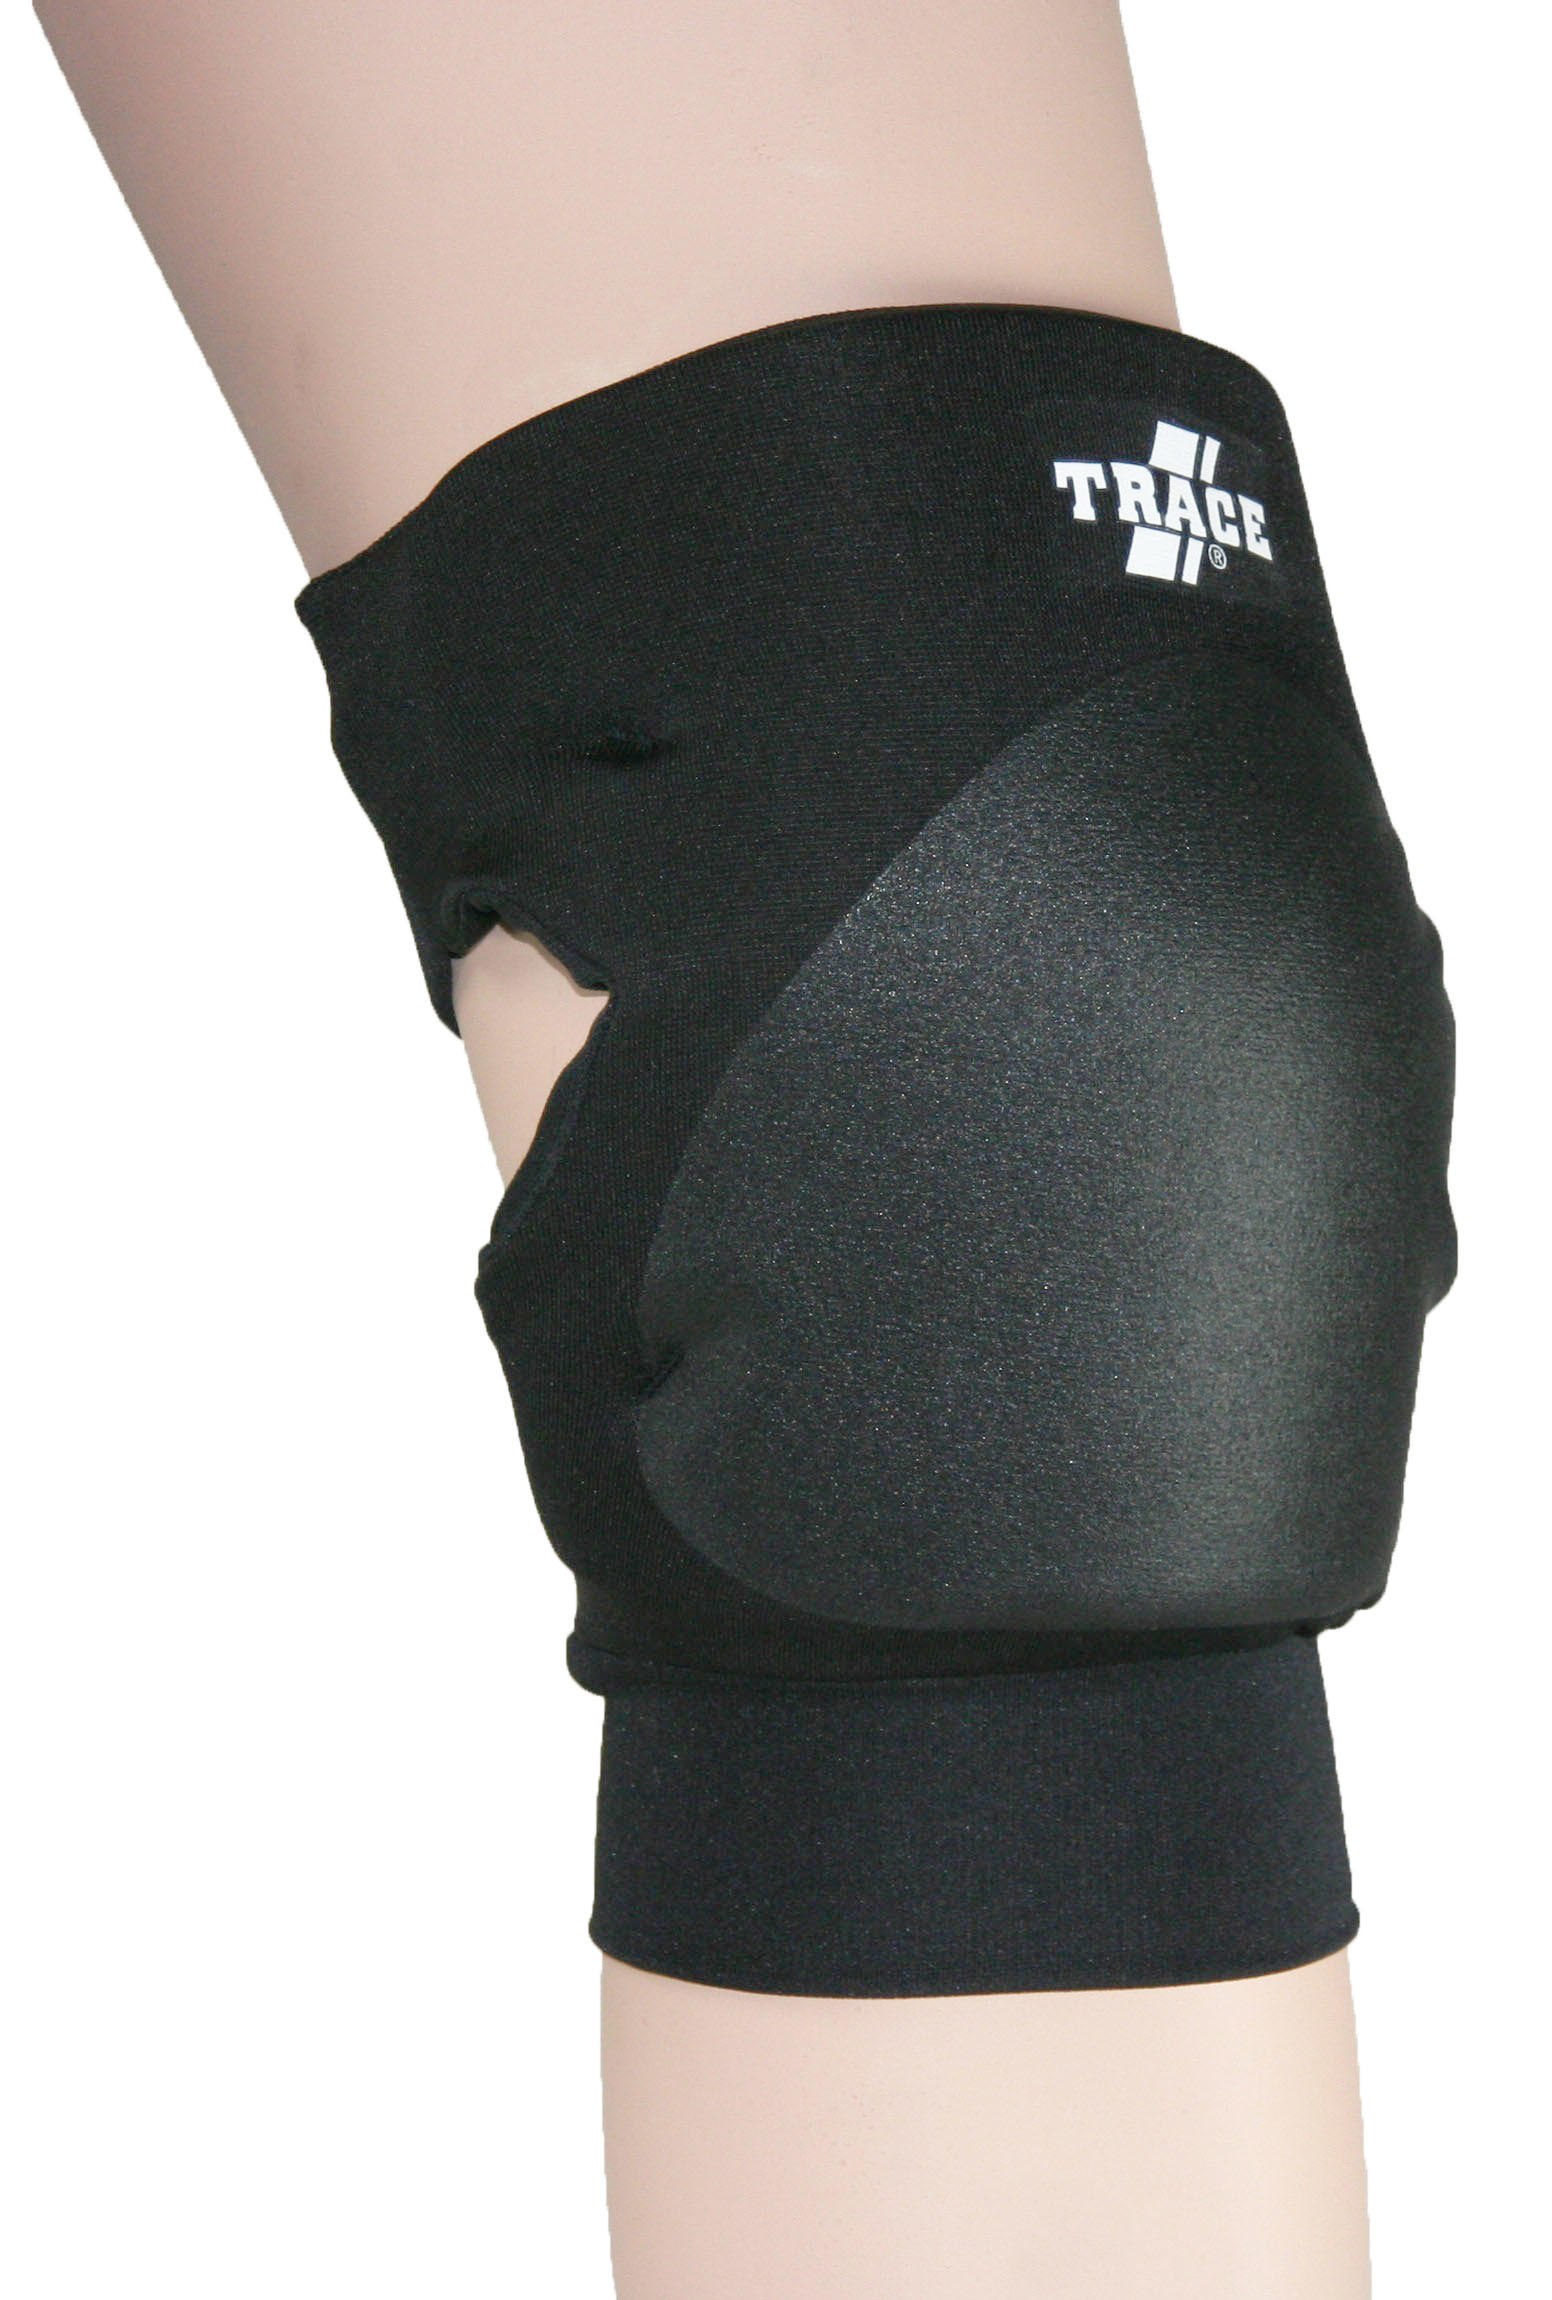 Trace 42000 Volleyball Knee Guard - Forelle Teamsports - American